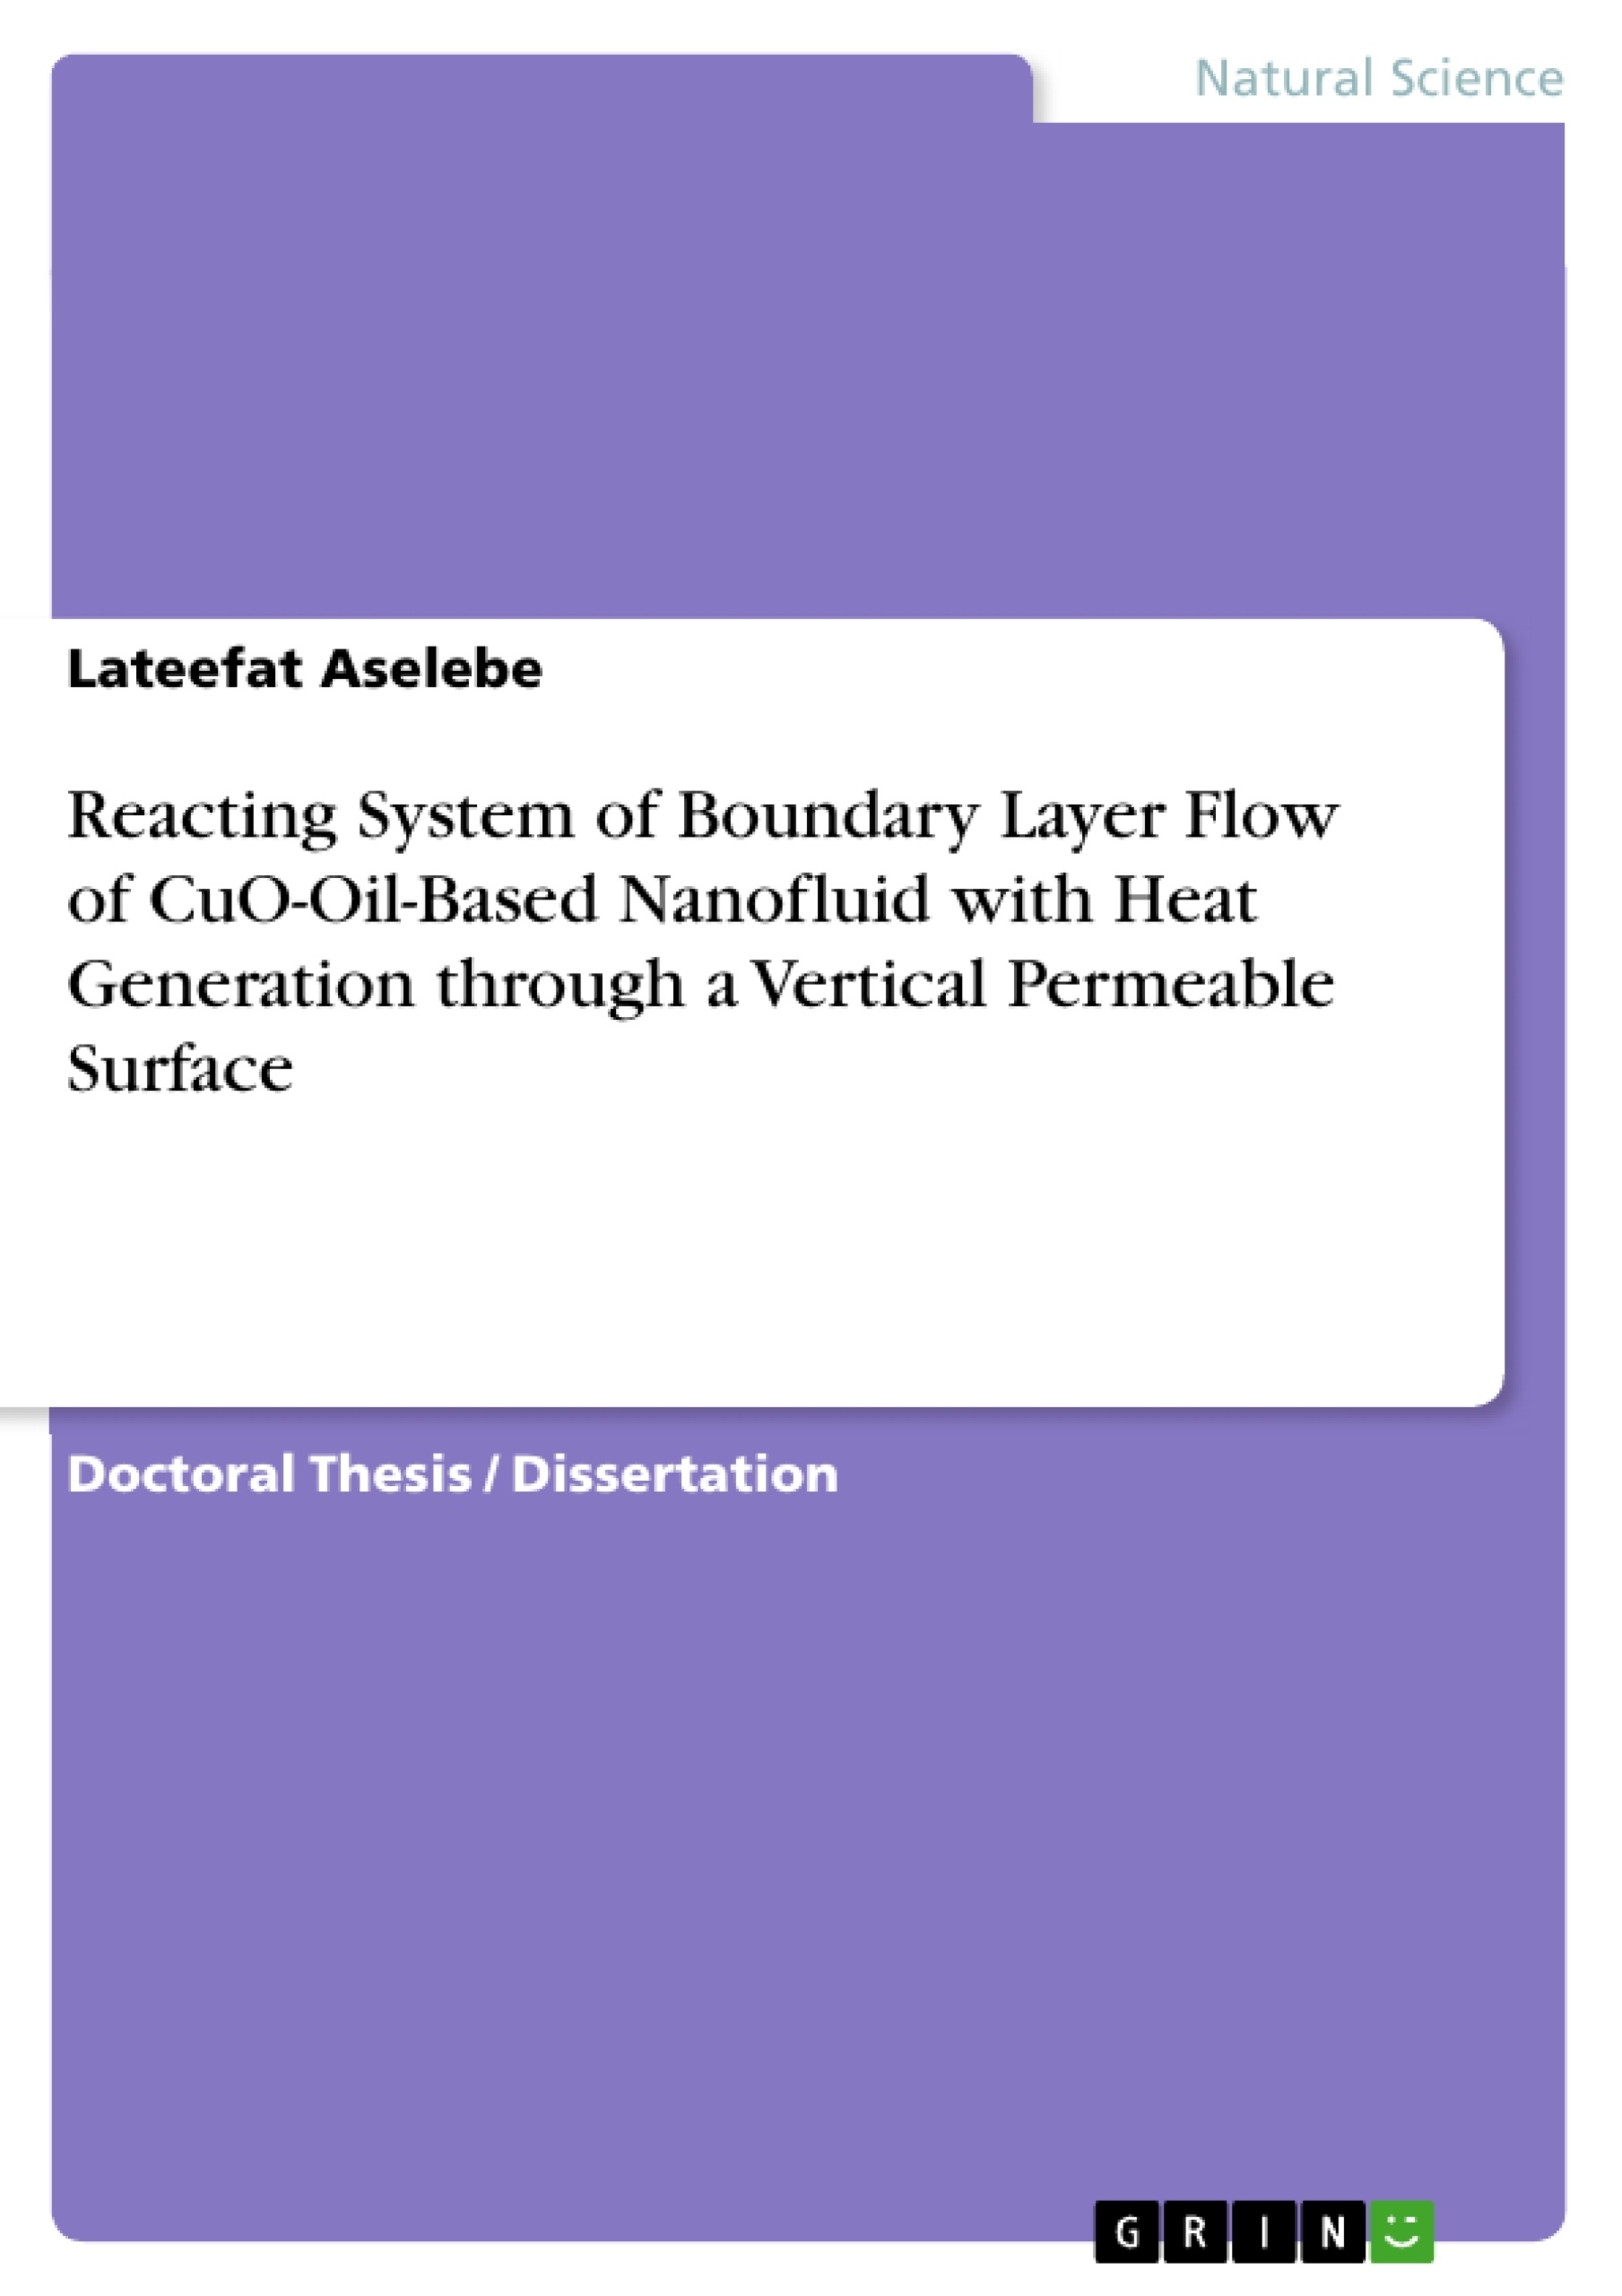 Título: Reacting System of Boundary Layer Flow of CuO-Oil-Based Nanofluid with Heat Generation through a Vertical Permeable Surface